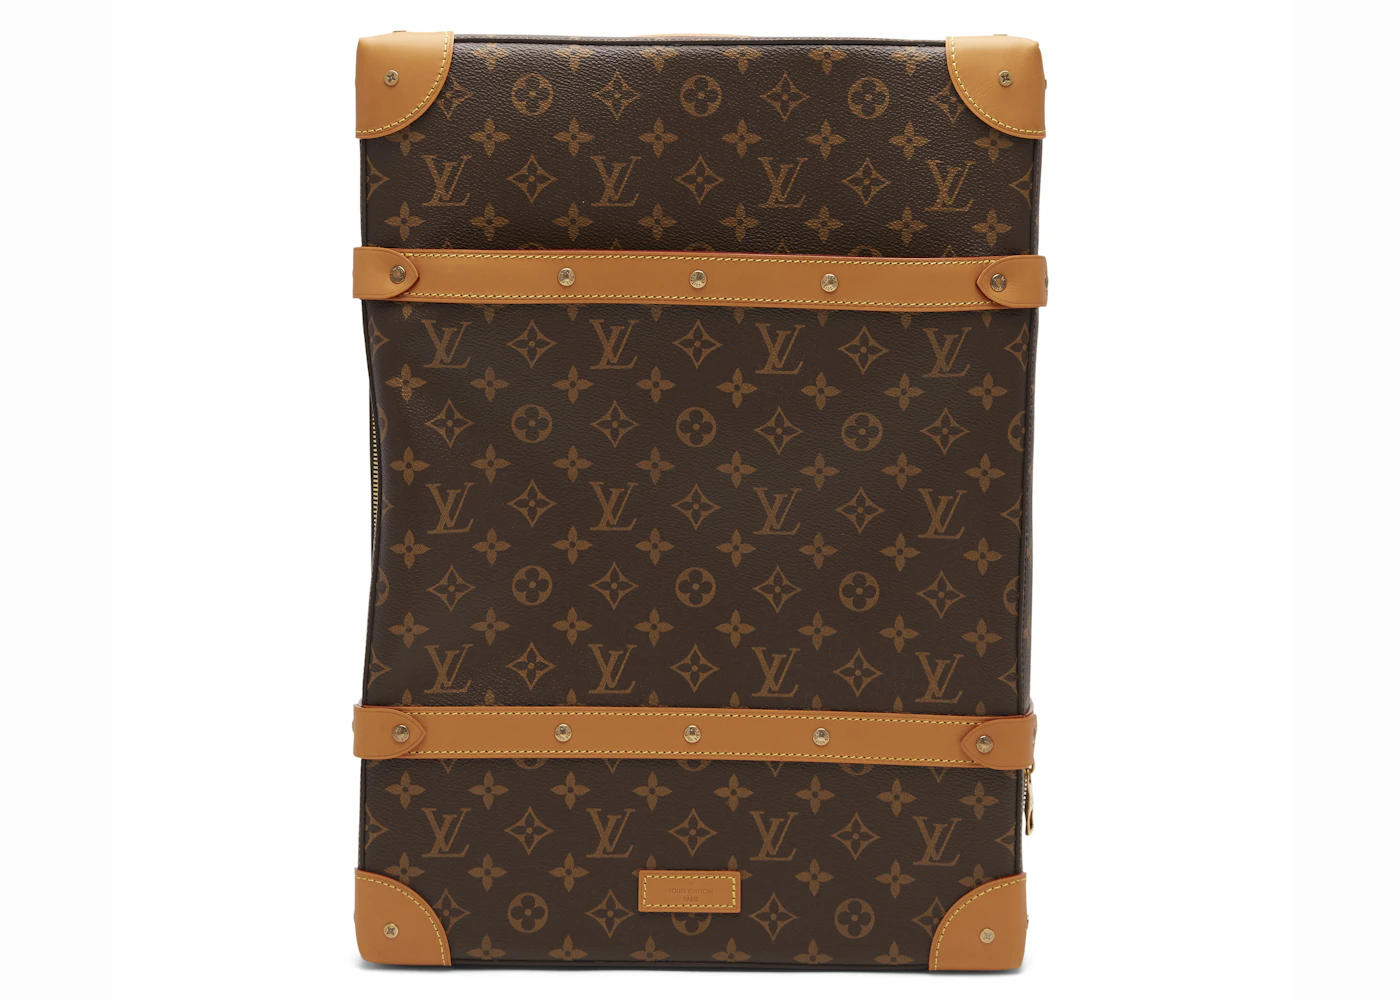 Louis Vuitton Soft Trunk Backpack Monogram Tuffetage PM Turquoise